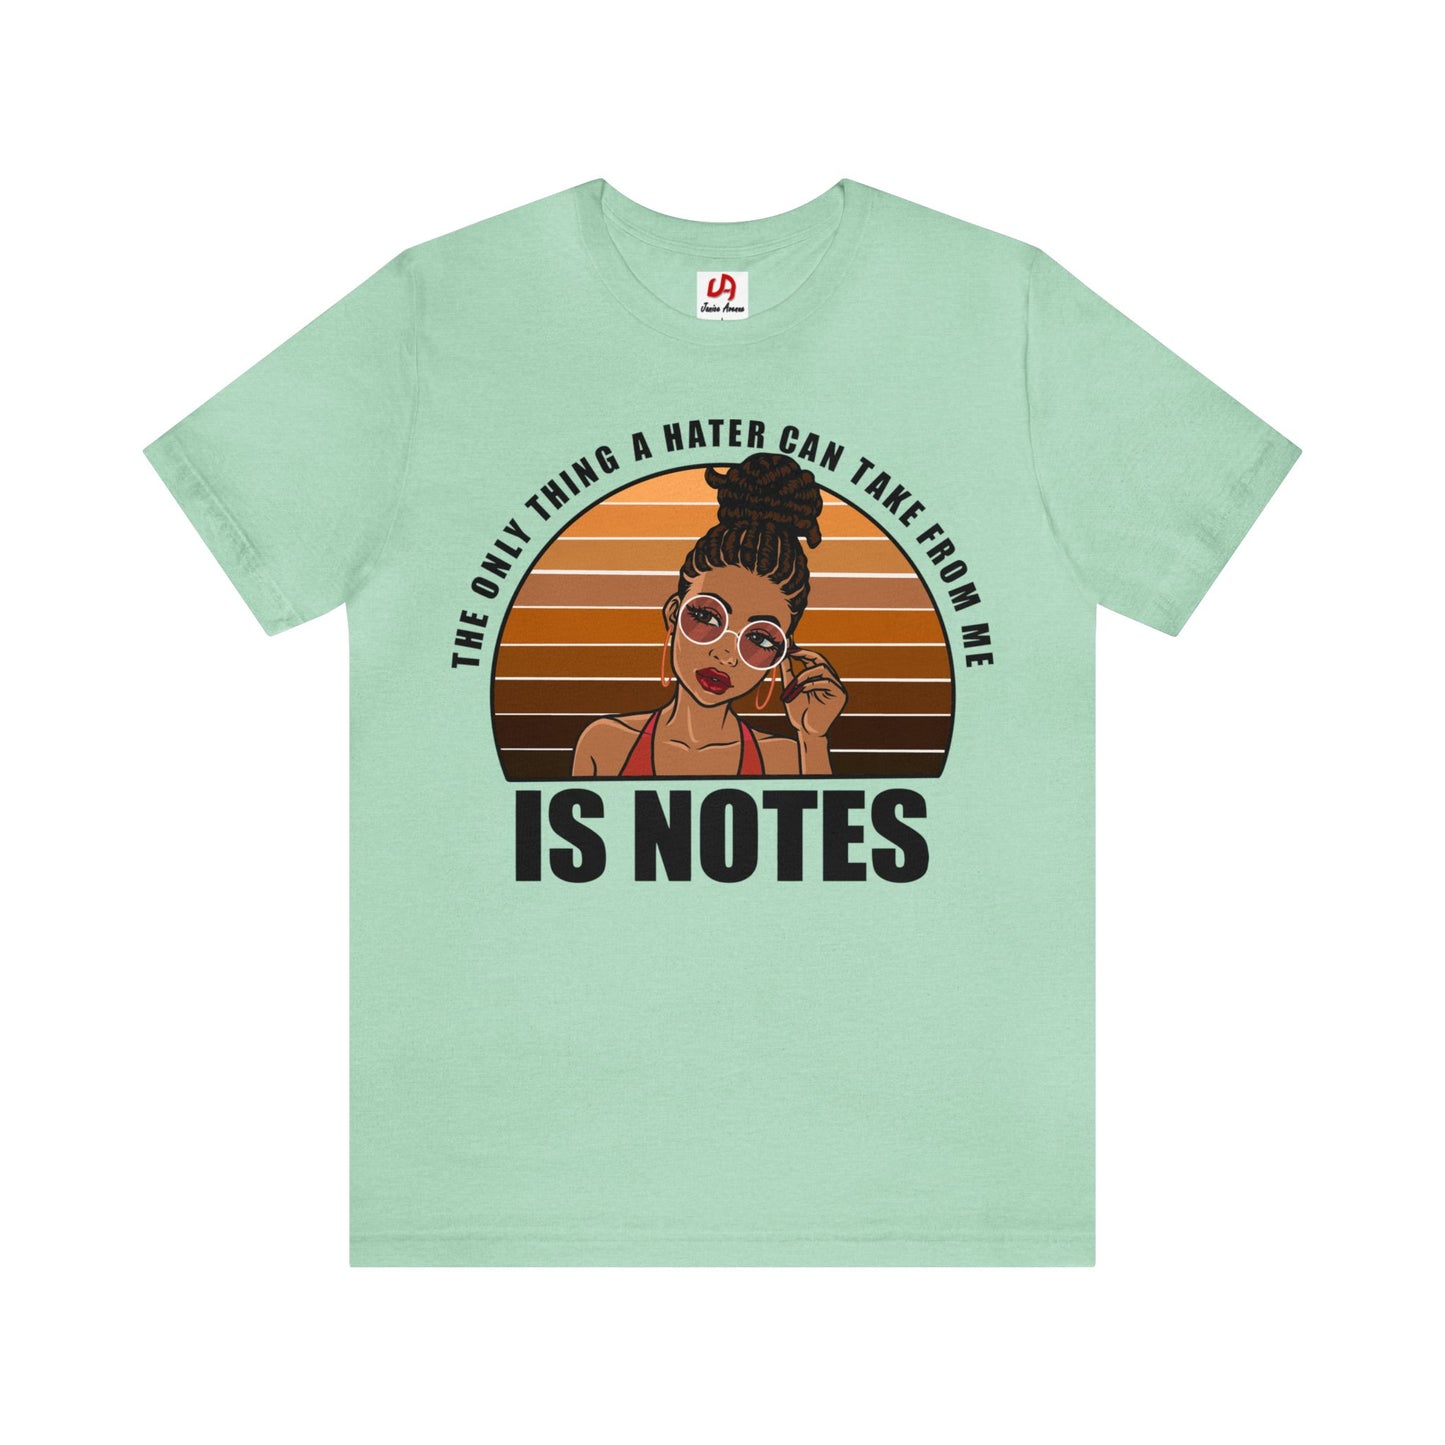 Women's Haters Take Note Shirt - Black Text